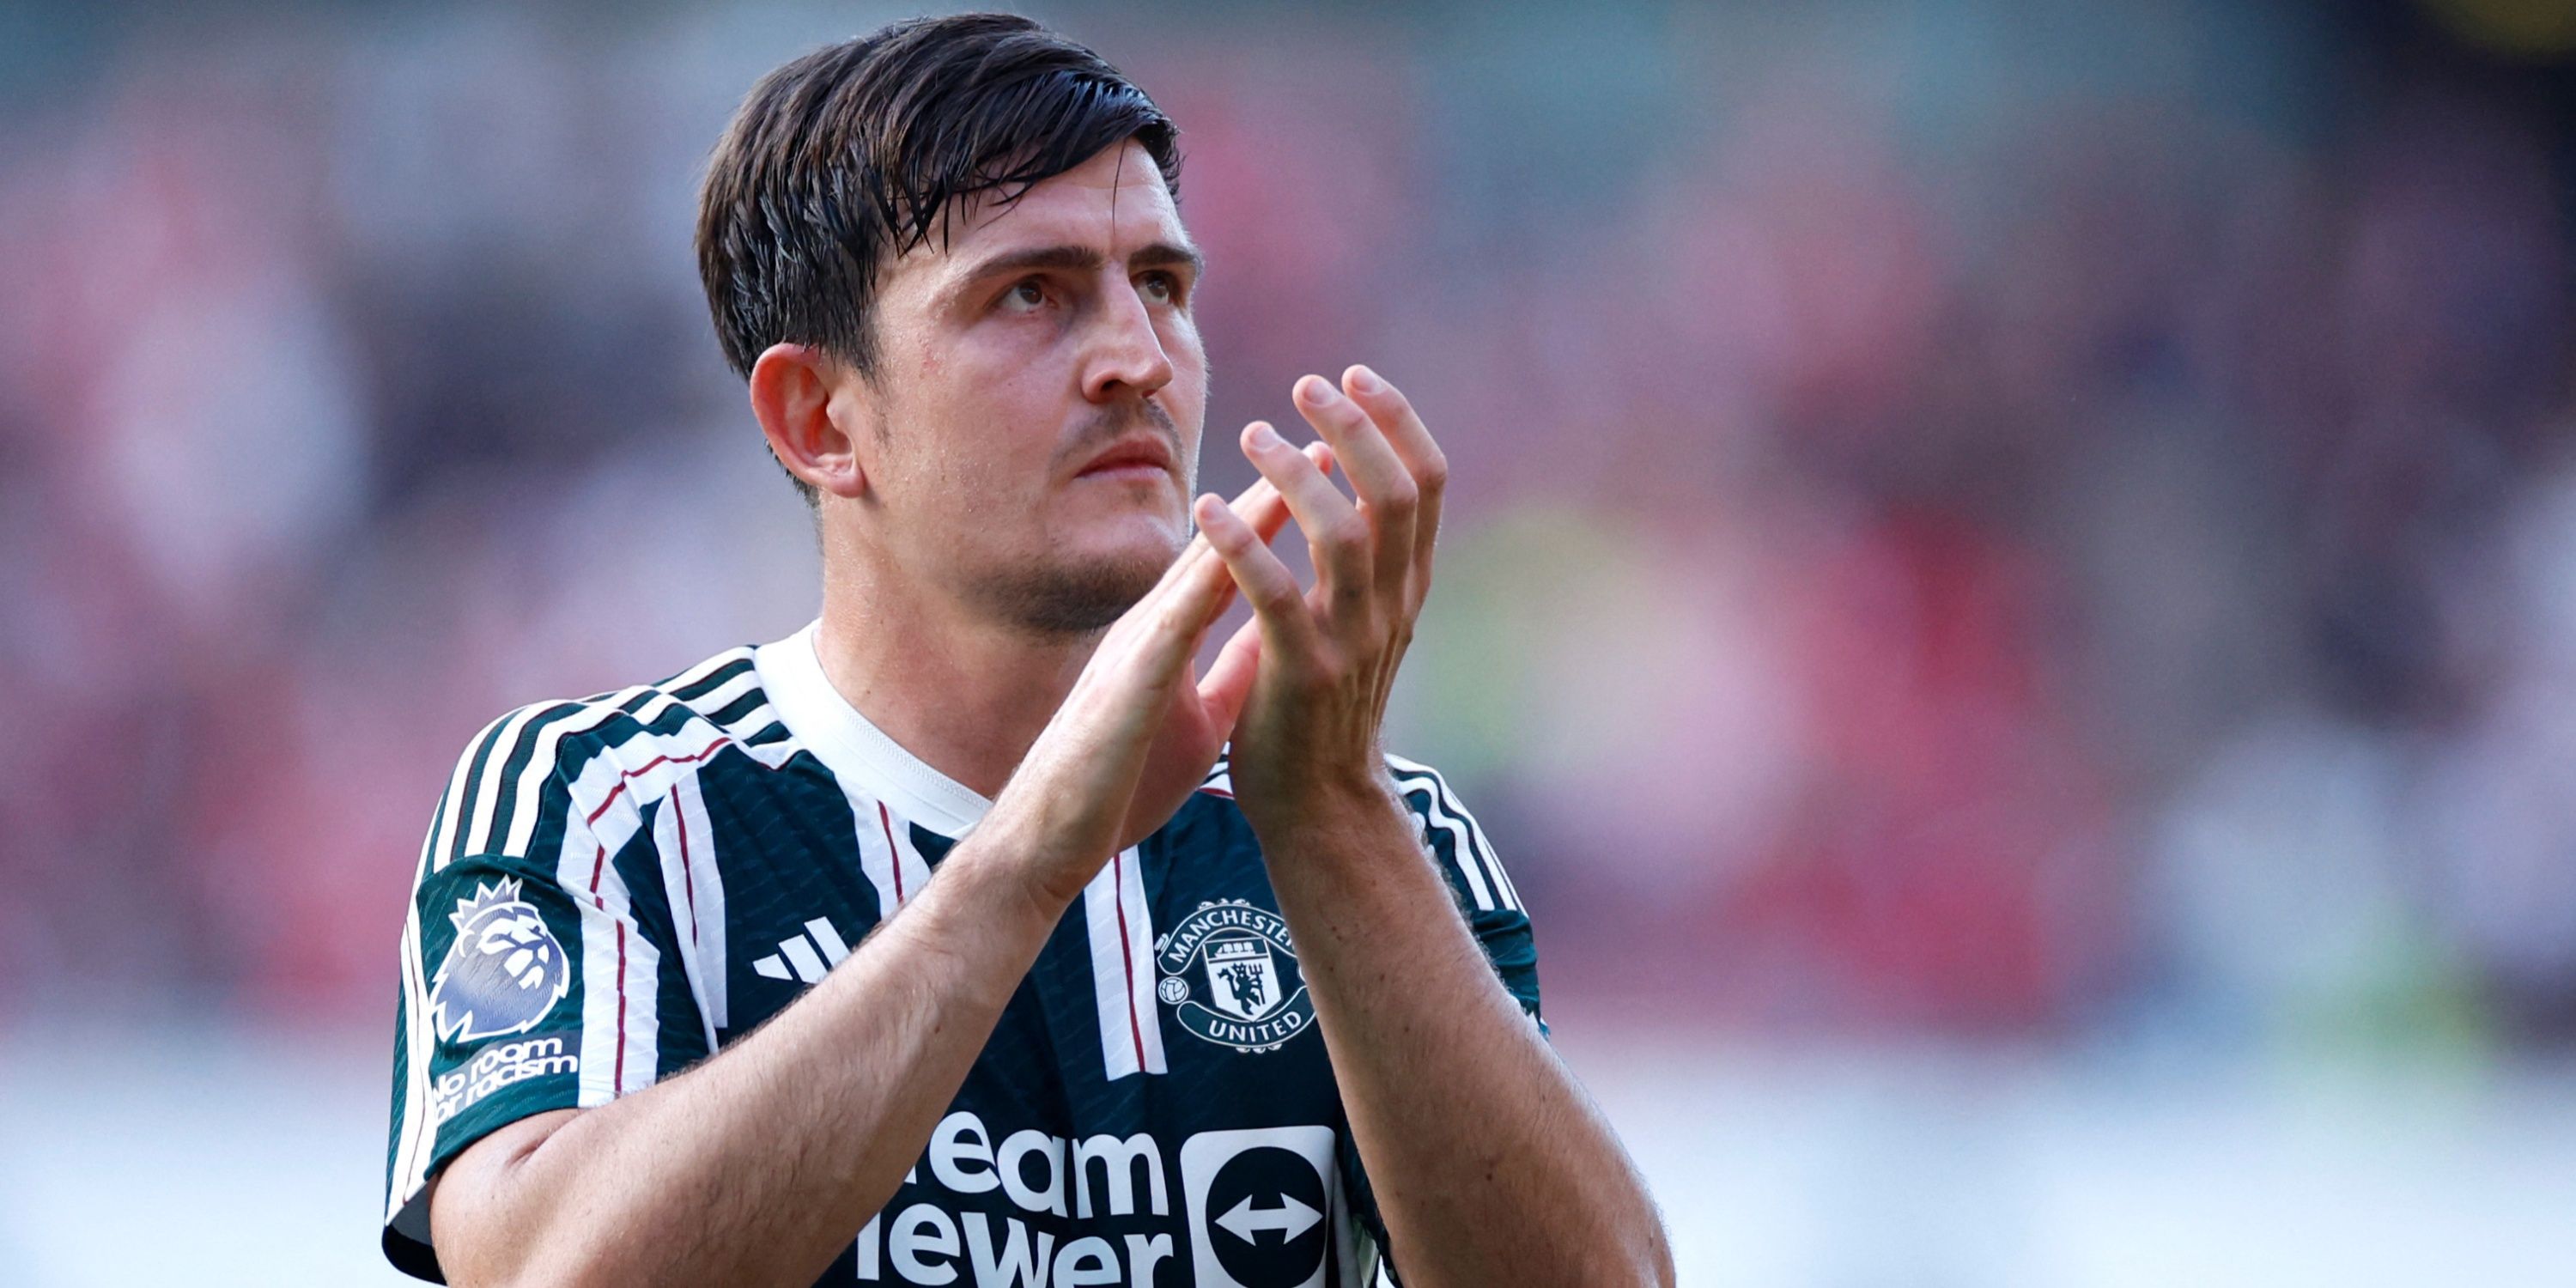 Manchester United centre-back Harry Maguire